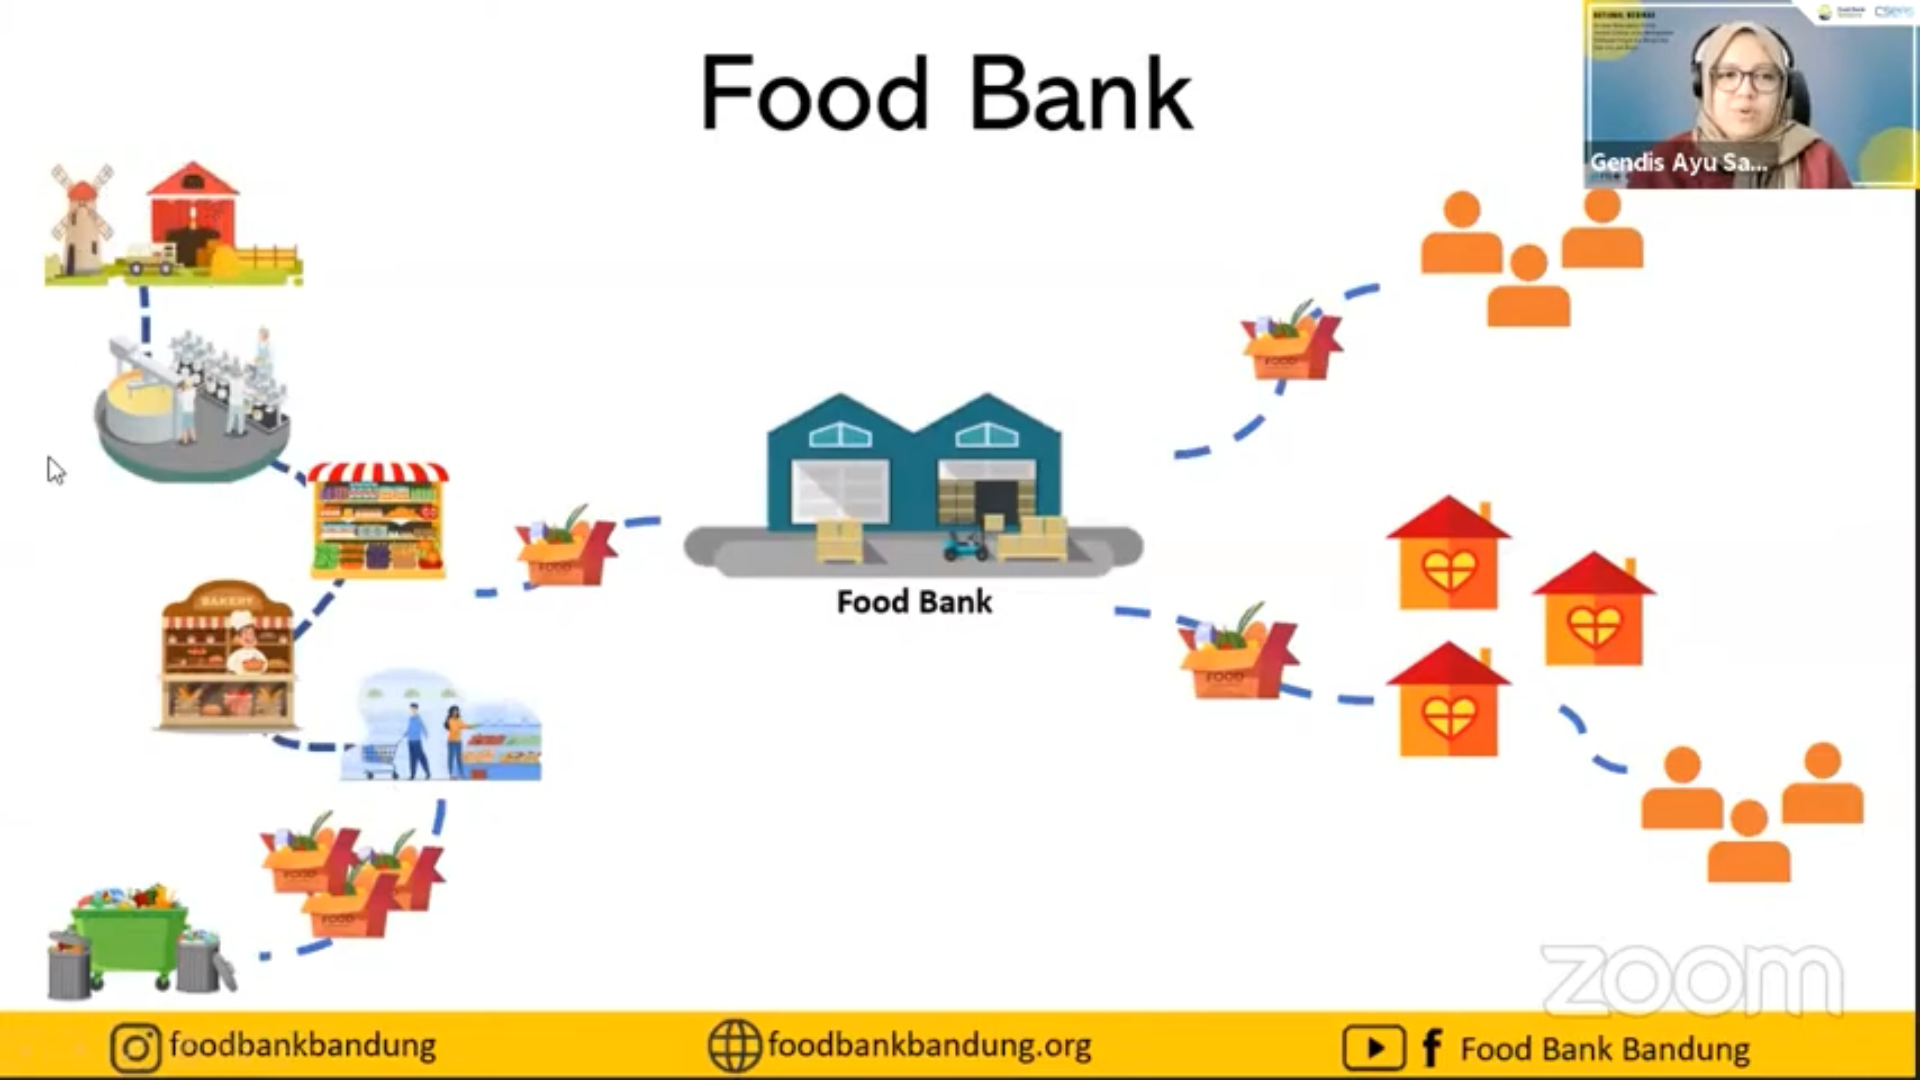 SBM ITB with Food Bank Bandung Holds a Webinar on the Establishment of a Circular and Integrated Food Bank Ecosystem in the City of Bandung